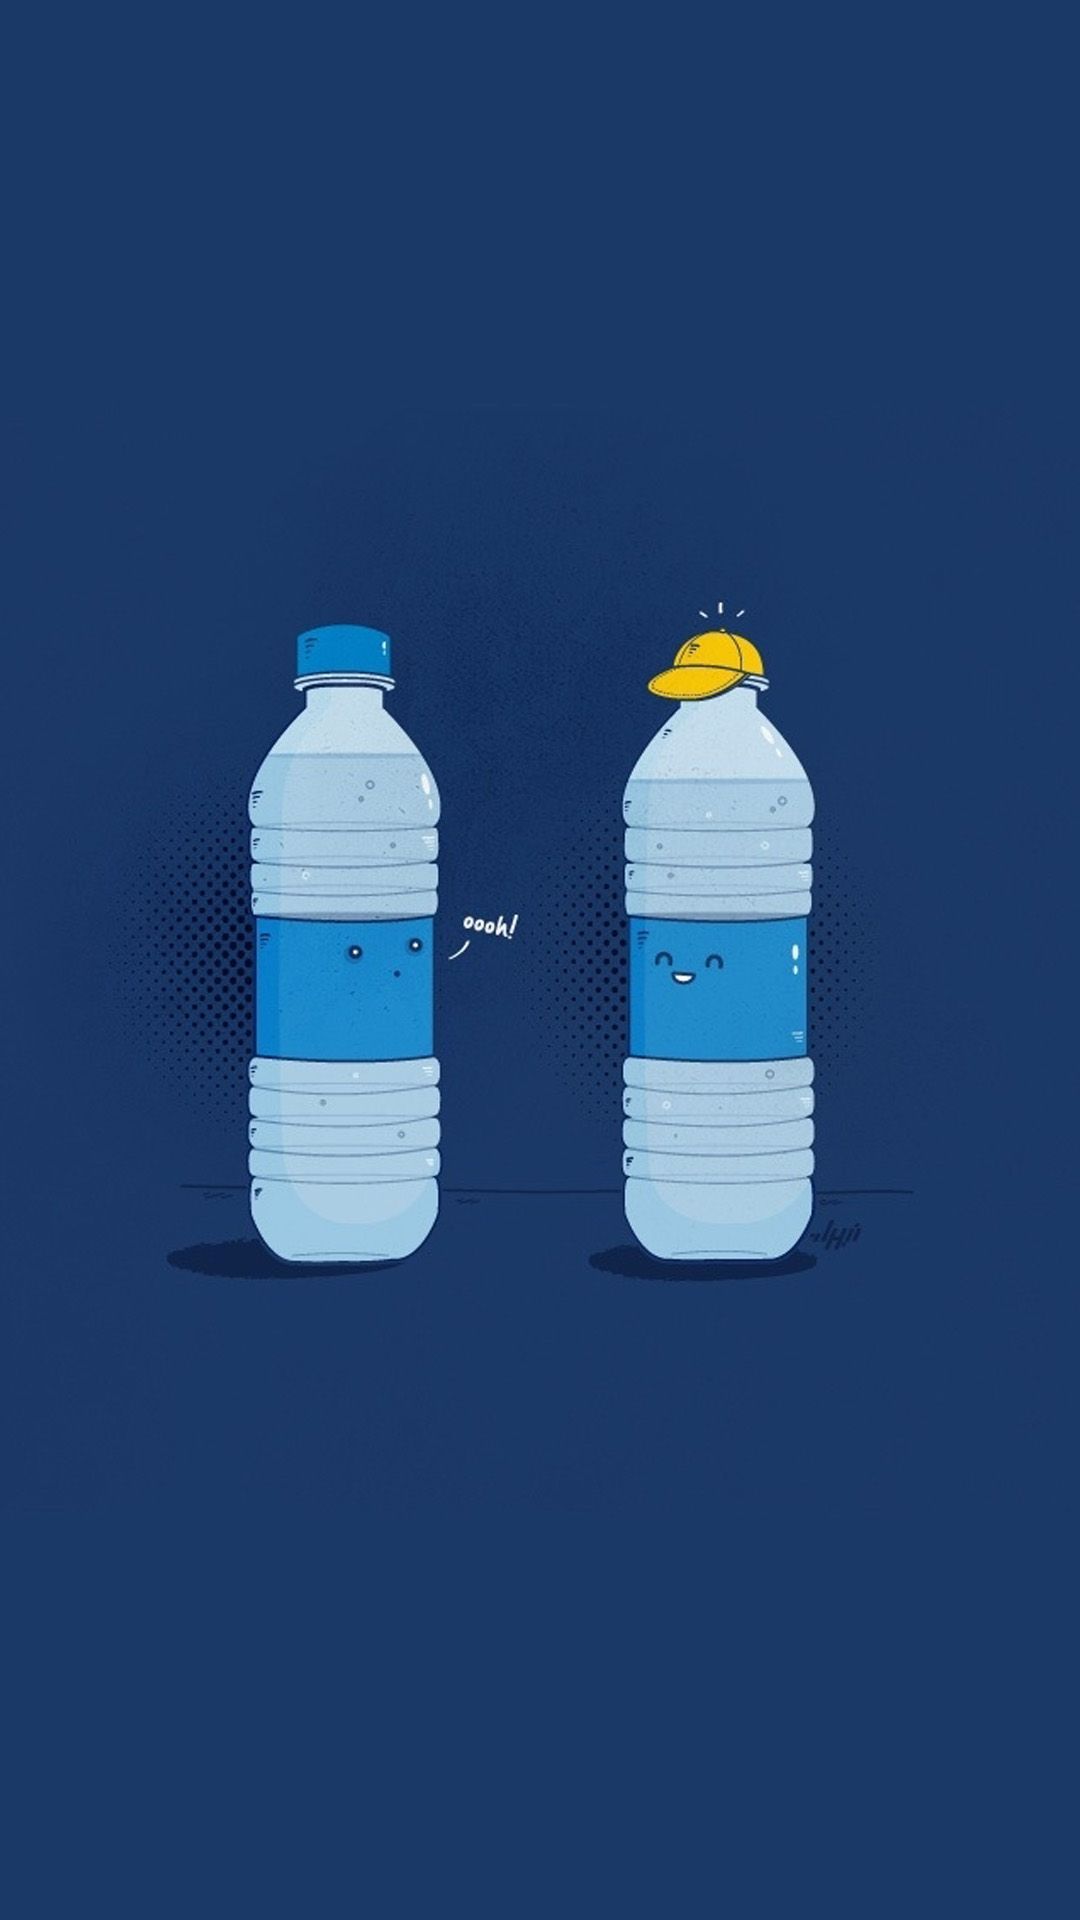 Cool Wallpaper Android site. Conceptual illustration, Creative poster design, Funny illustration